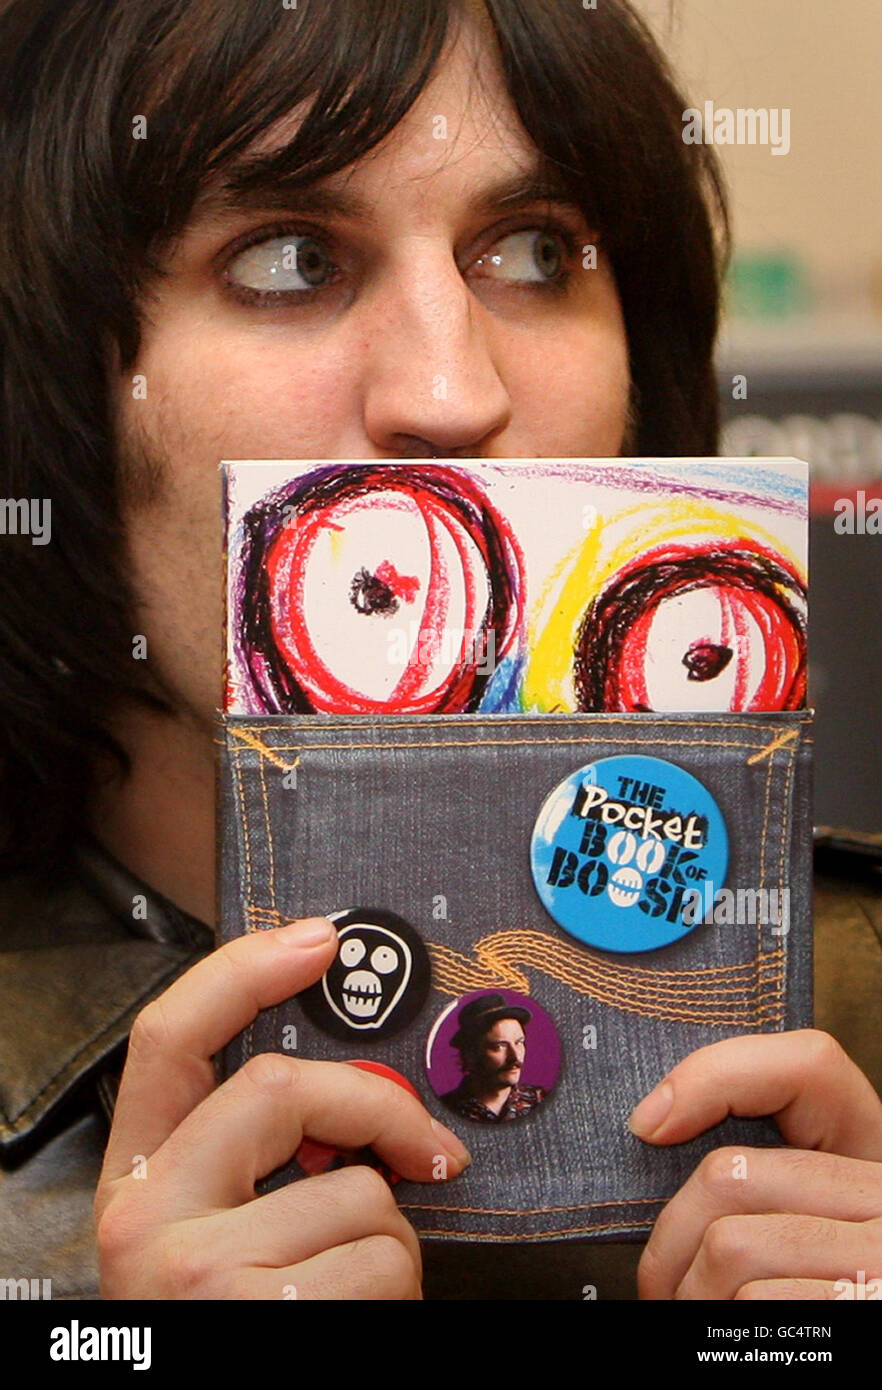 Noel Fielding, one half of Comedy duo The Mighty Boosh during a signing session for their book The Pocket Book of Boosh at Borders Books in Glasgow. Stock Photo